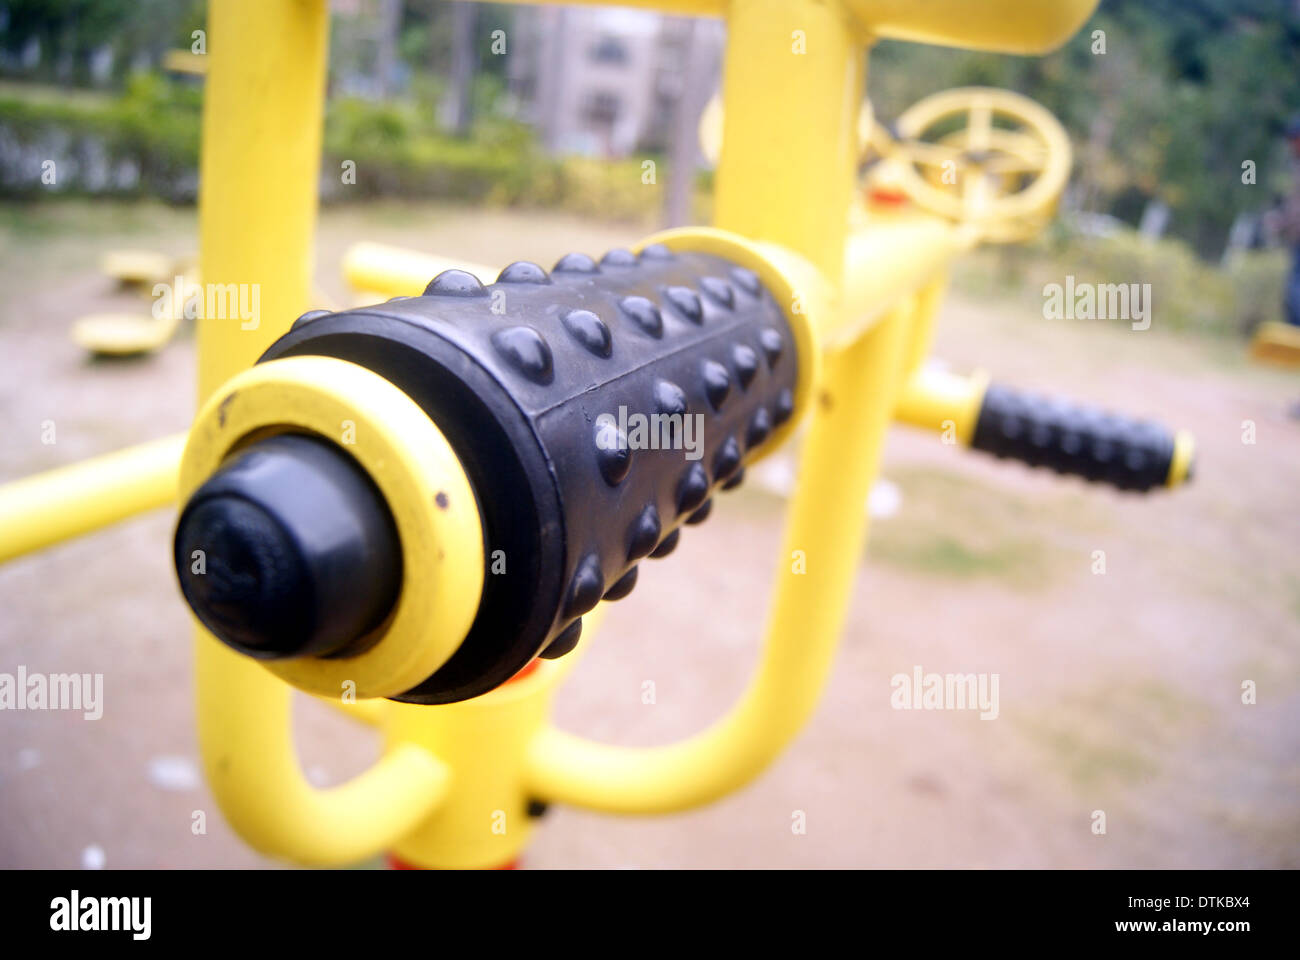 Fitness equipment and sports facilities, in China's residential area Stock Photo